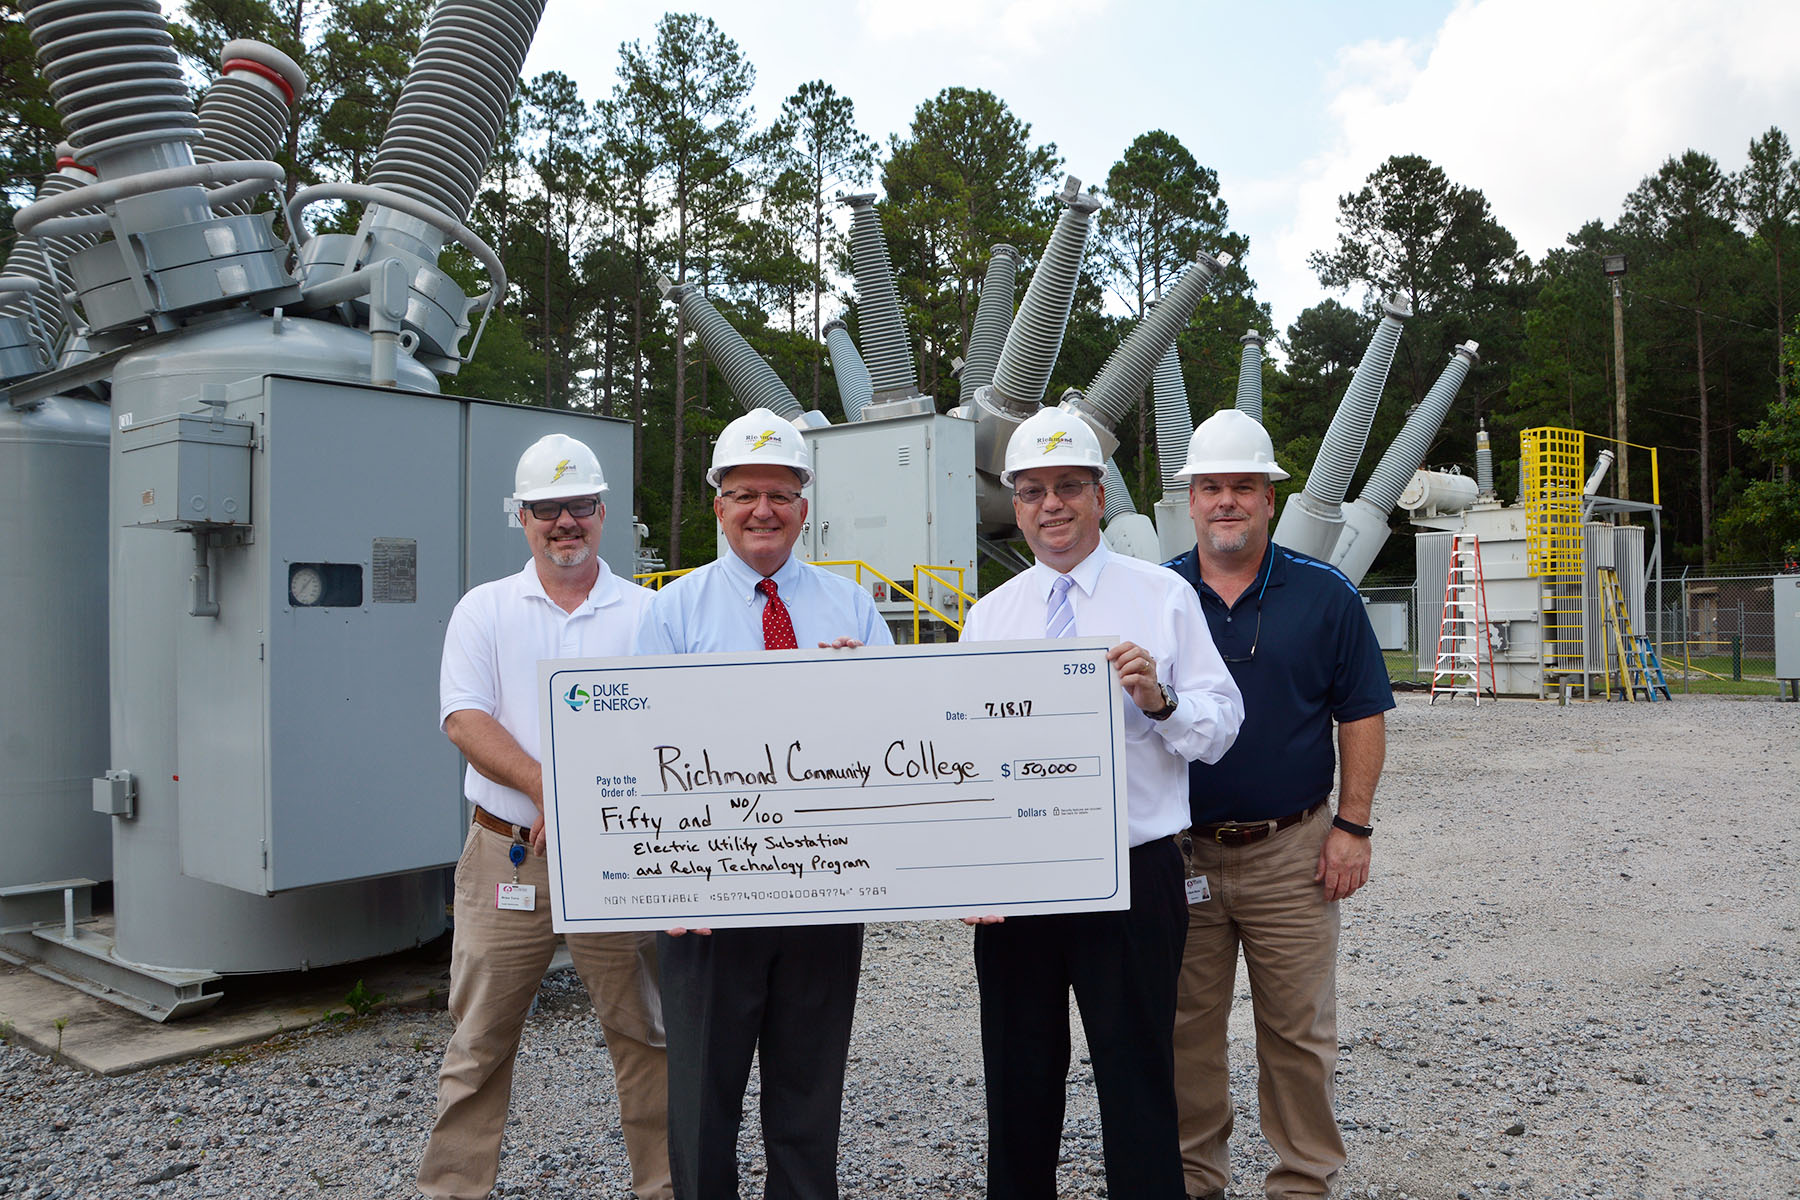 Duke Energy's David McNeill presents a check for $50,000 to the College to support the substation program.